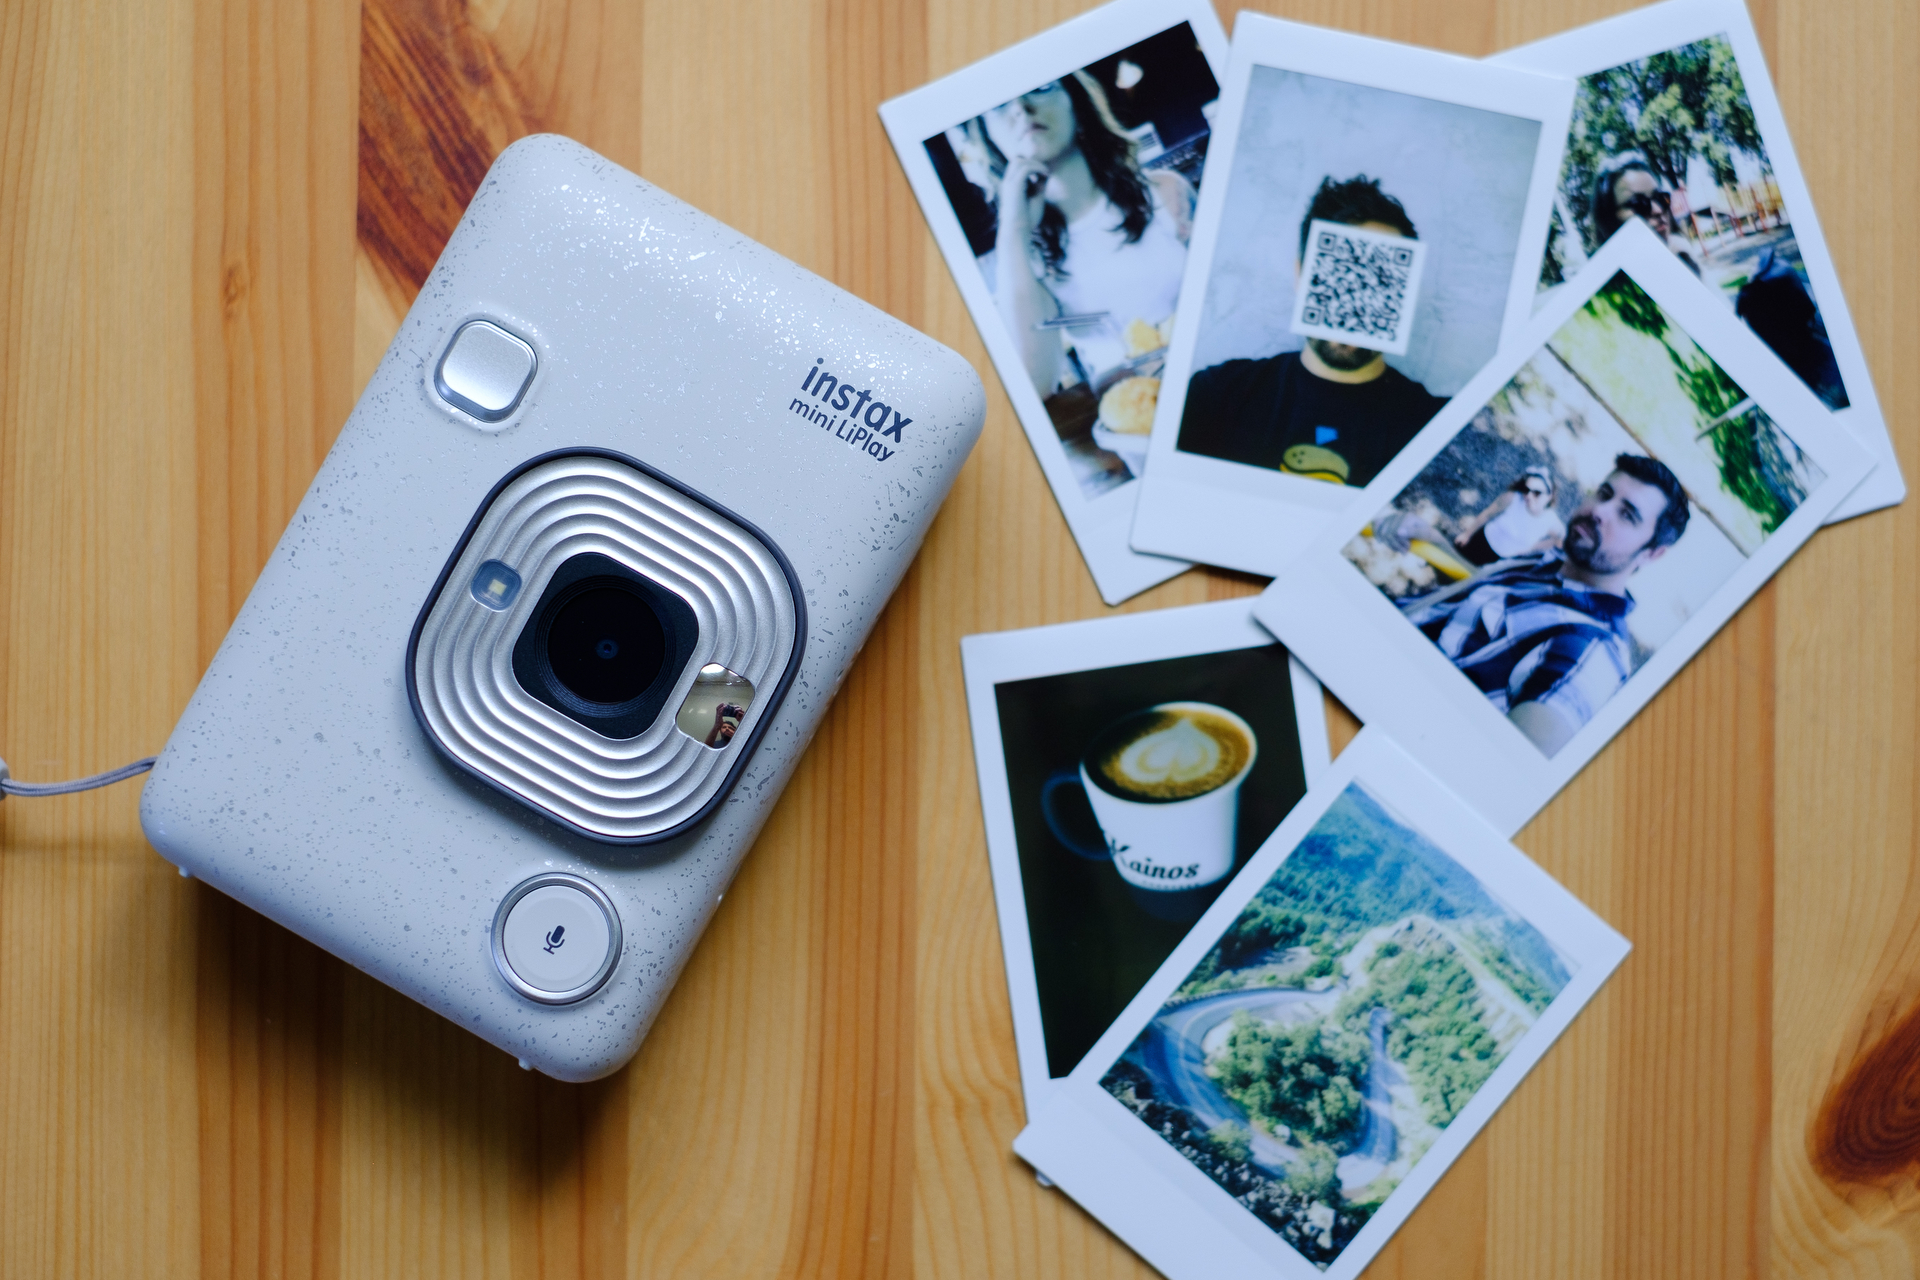 The Fujifilm Instax Mini LiPlay is an instant camera and printer